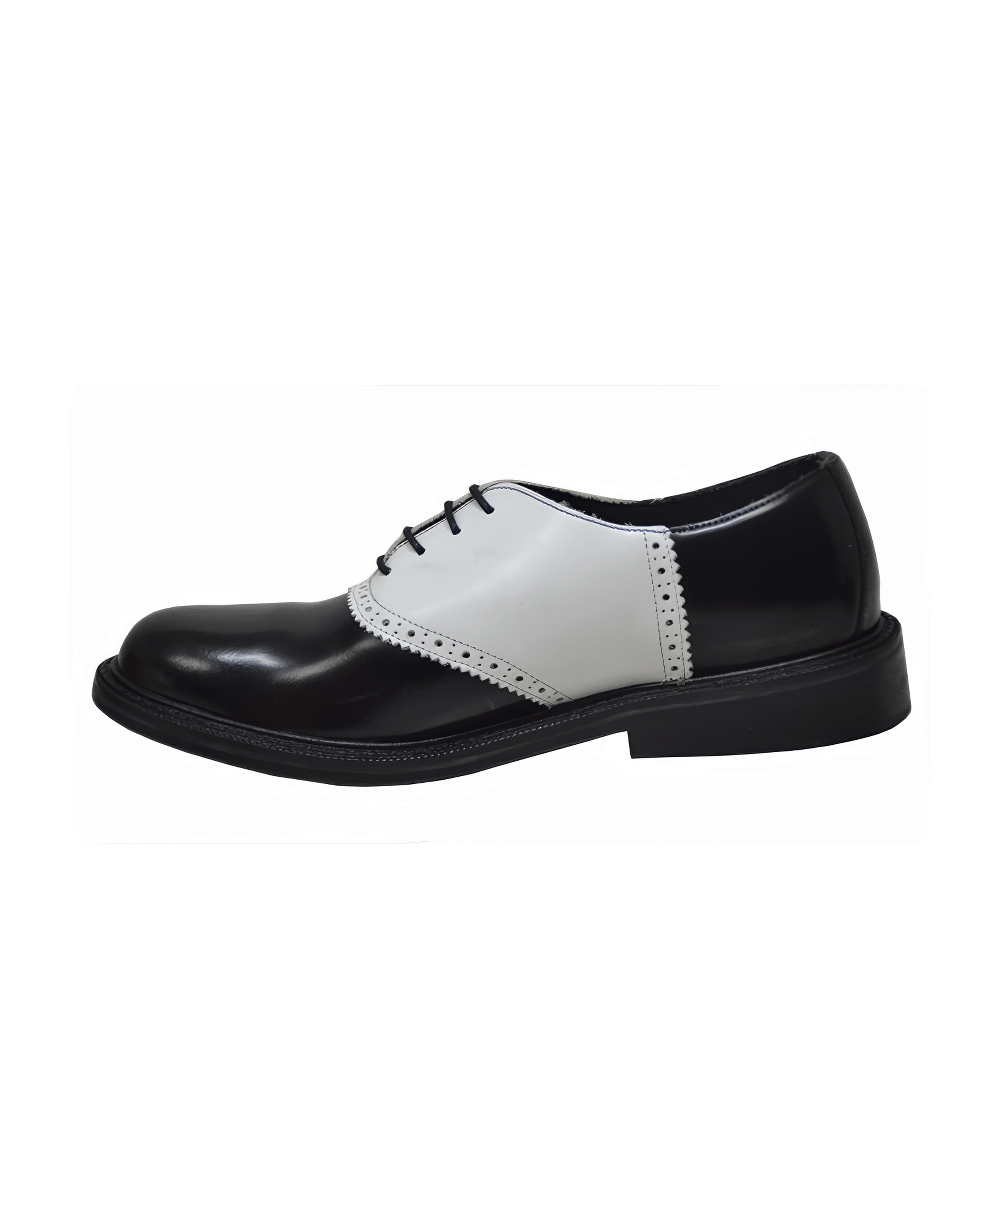 Rockabilly Style Black Oxford Leather Shoes for Men